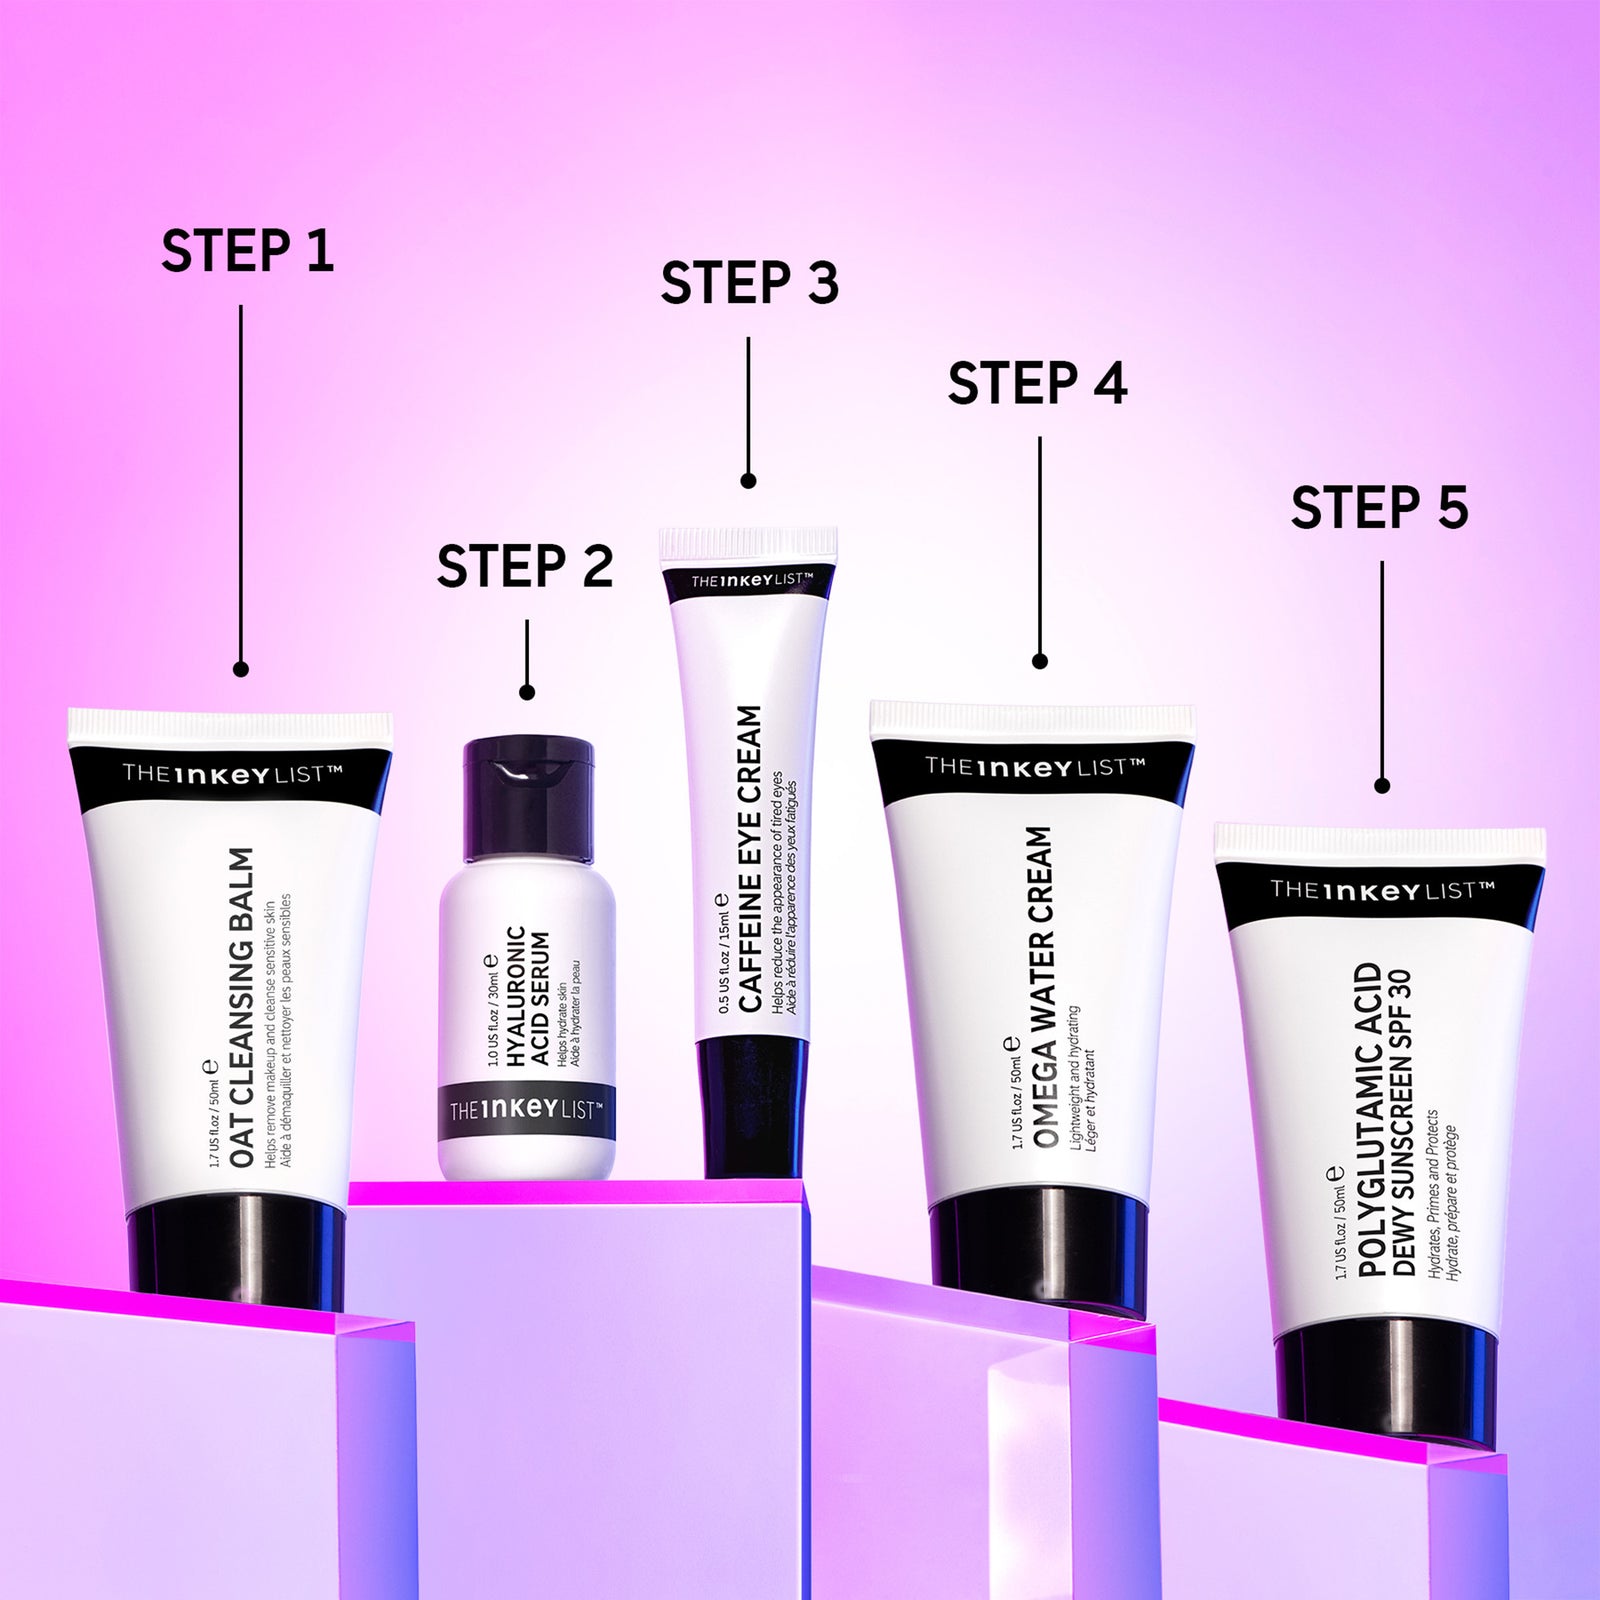 Lightshot of The INKEY Intro Routine displaying the order/ step each product in this routine should be used in a skincare routine